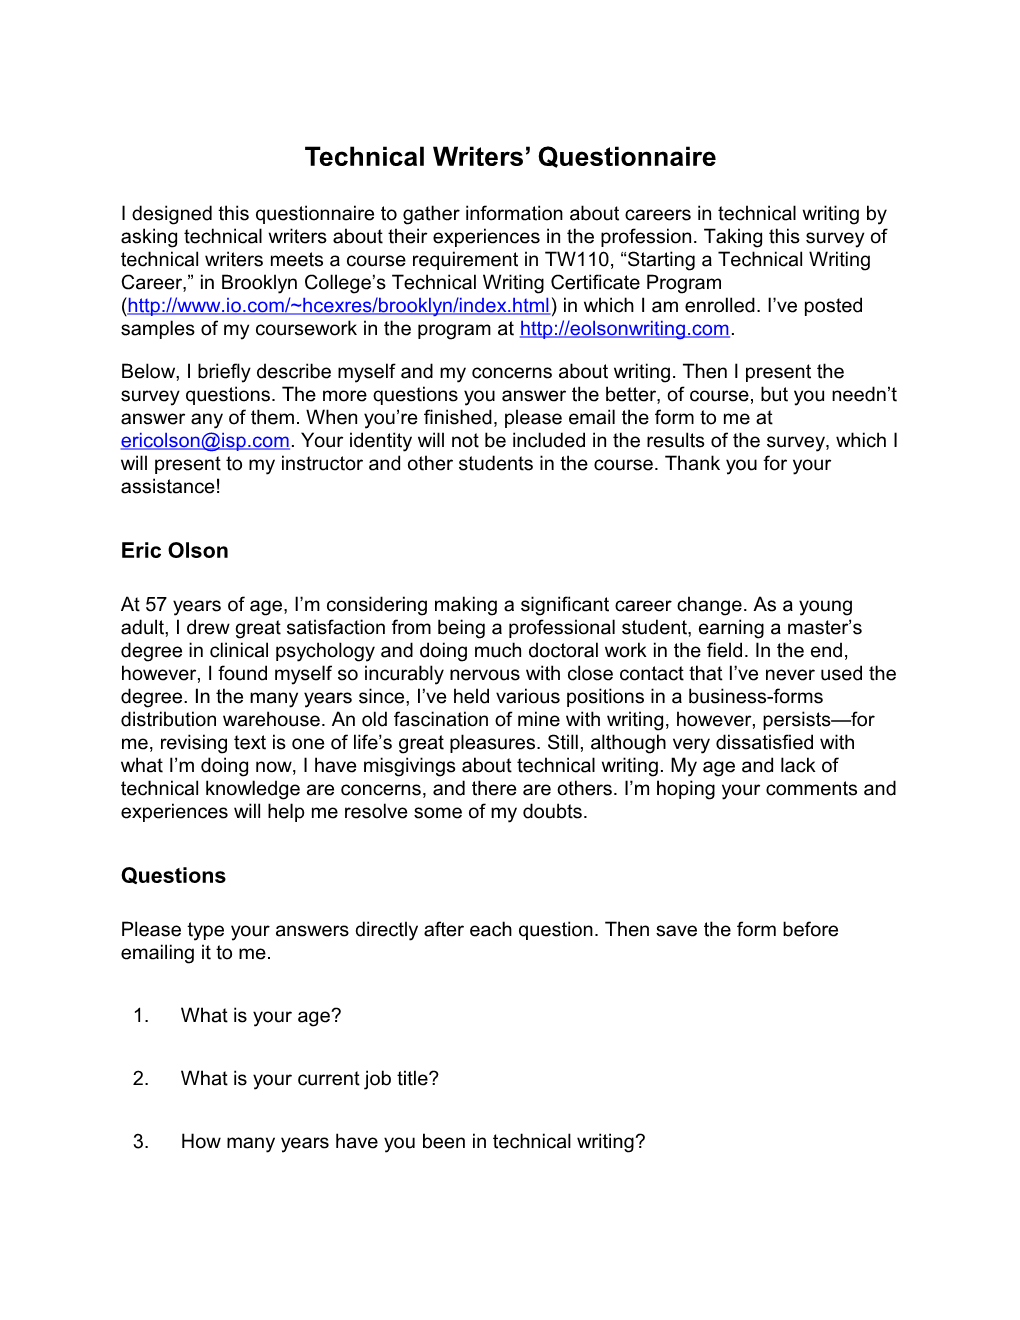 Technical Writing Questionnaire